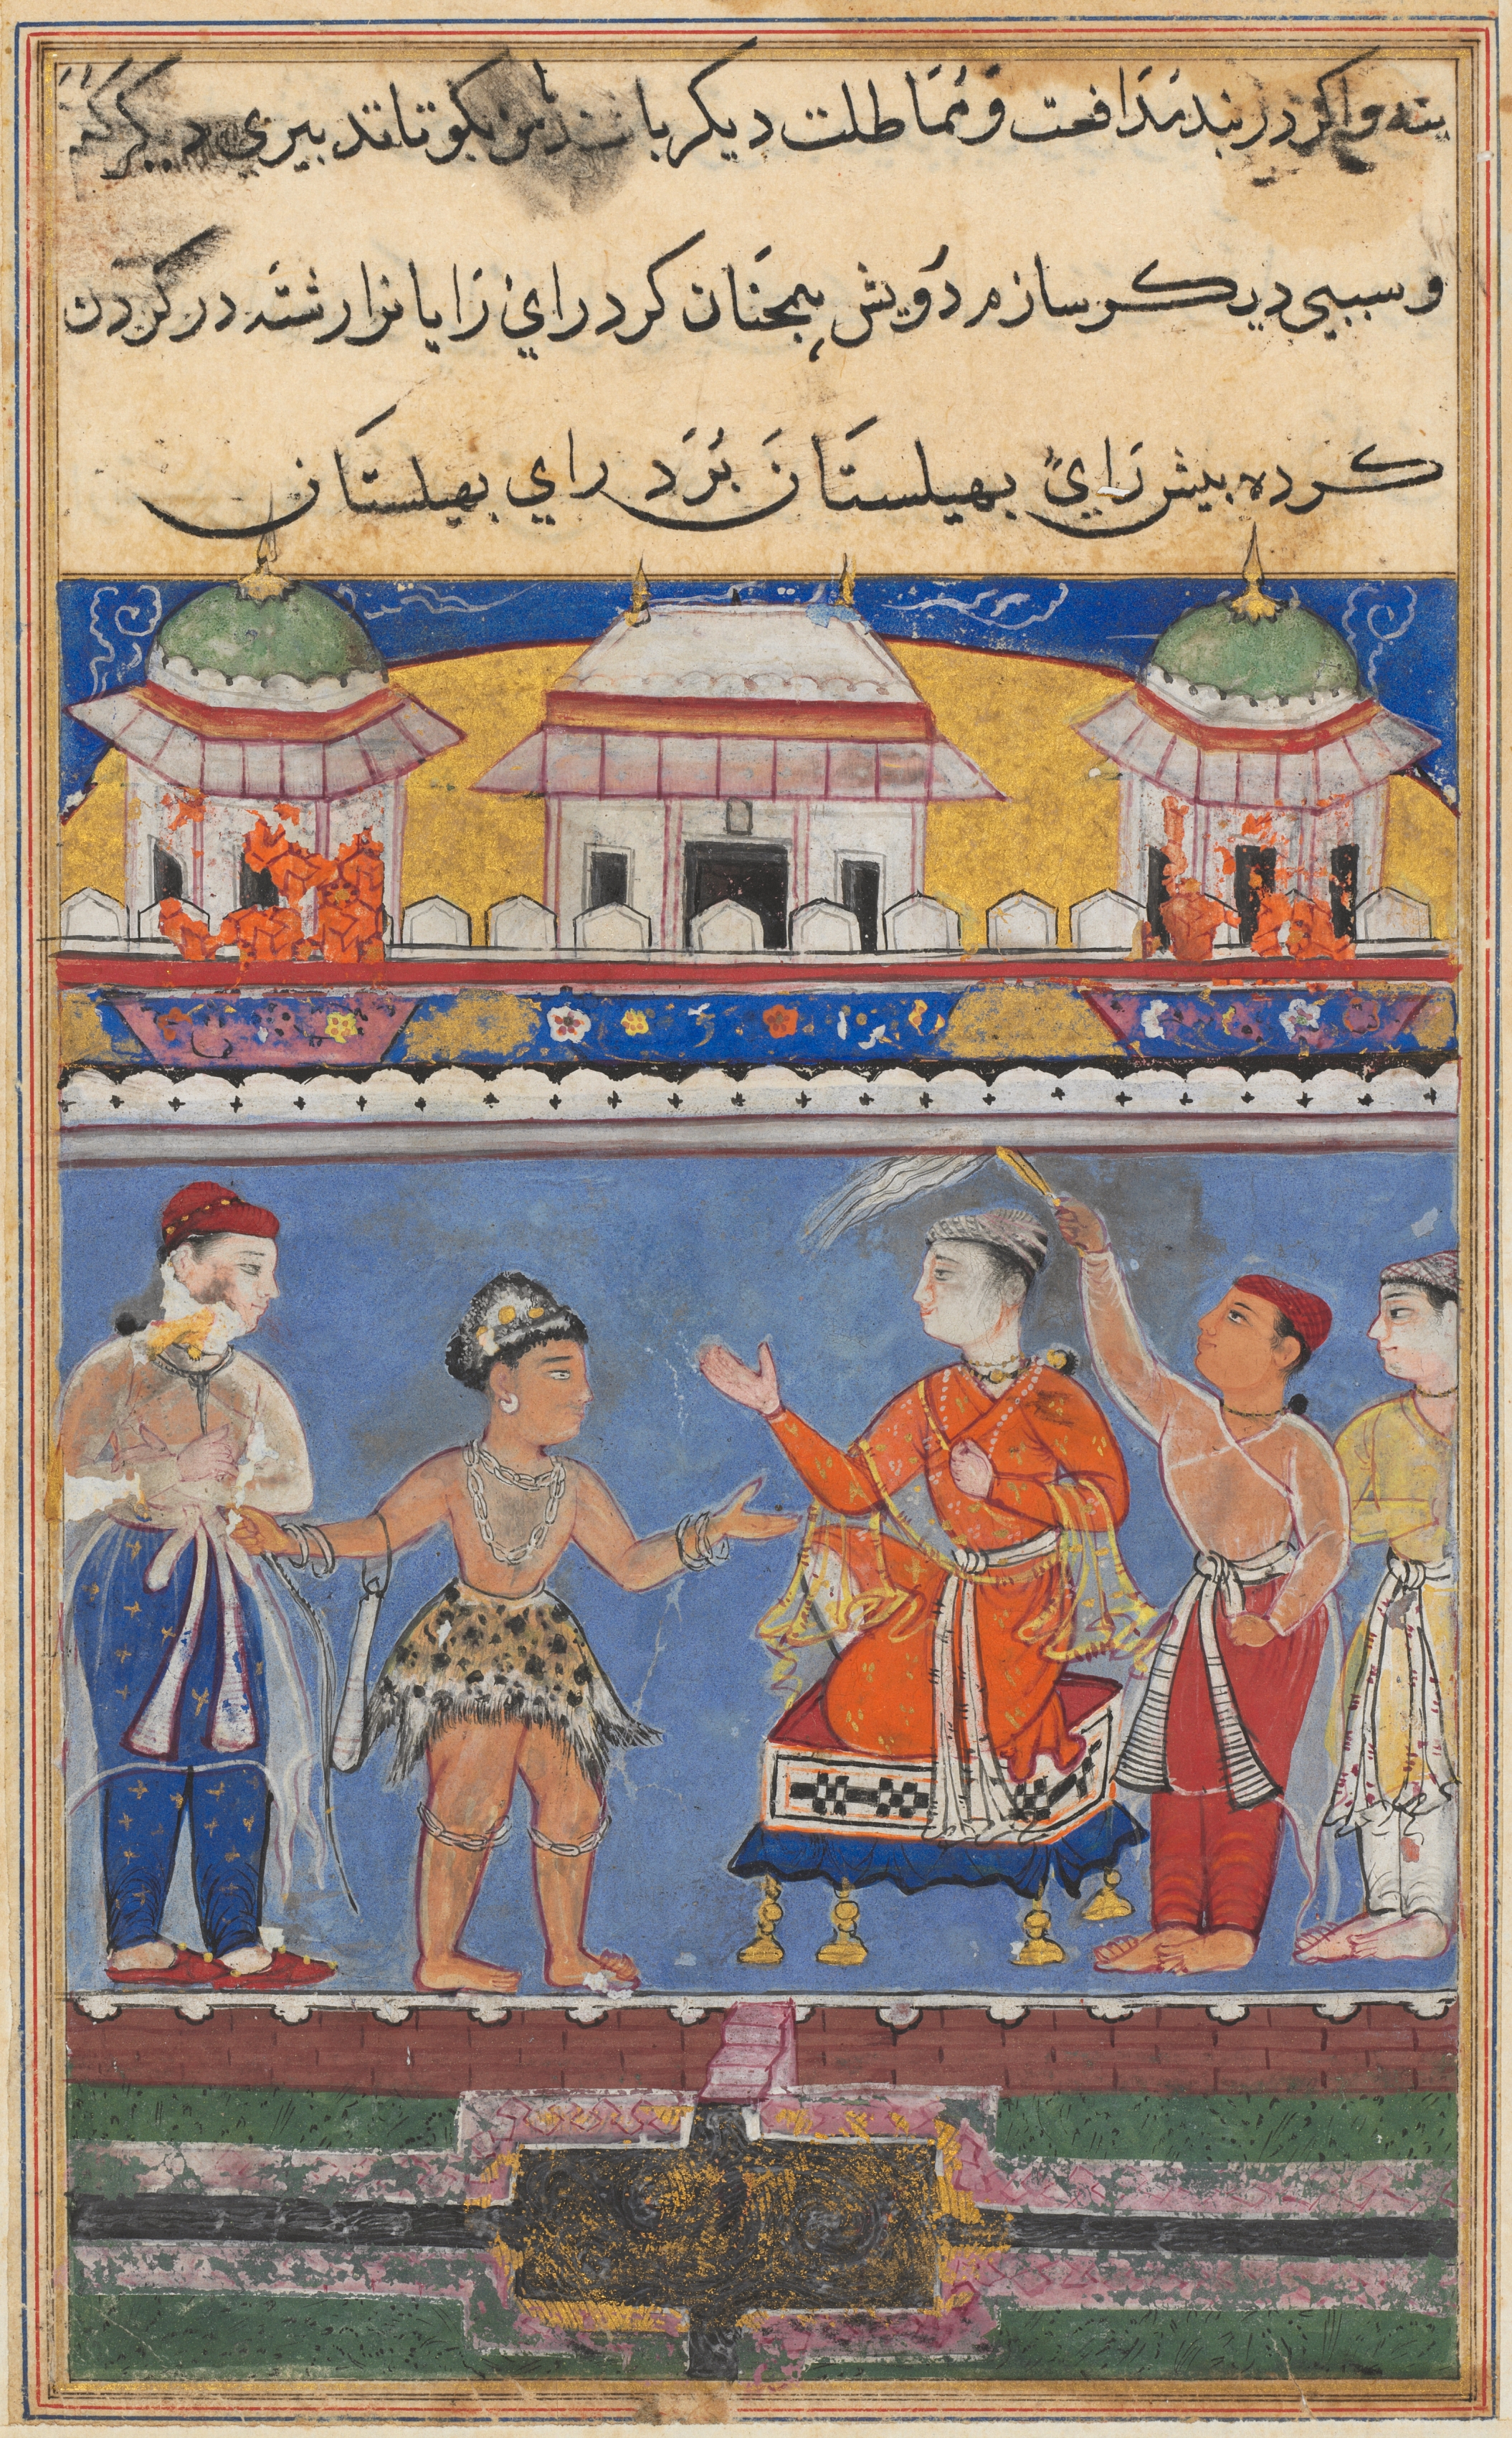 The dervish brings the King of Kings before the king of Bahilistan, from a Tuti-nama (Tales of a Parrot): Seventh Night